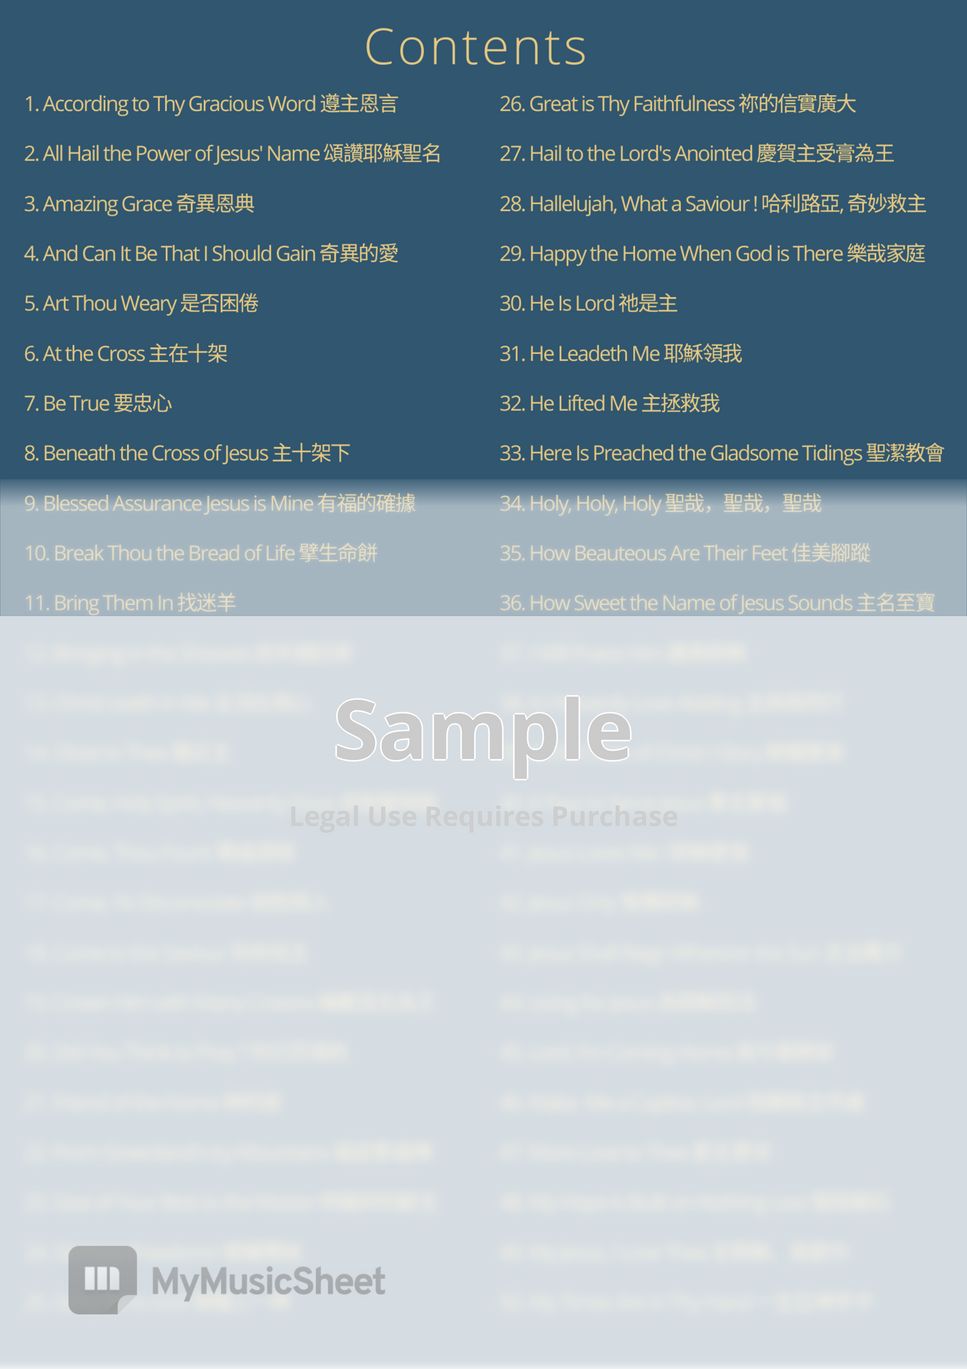 (Melody and Chords Only) - 100 Hymns Lead Sheets 100首傳統詩歌Chord譜 by Music Canaan Studio